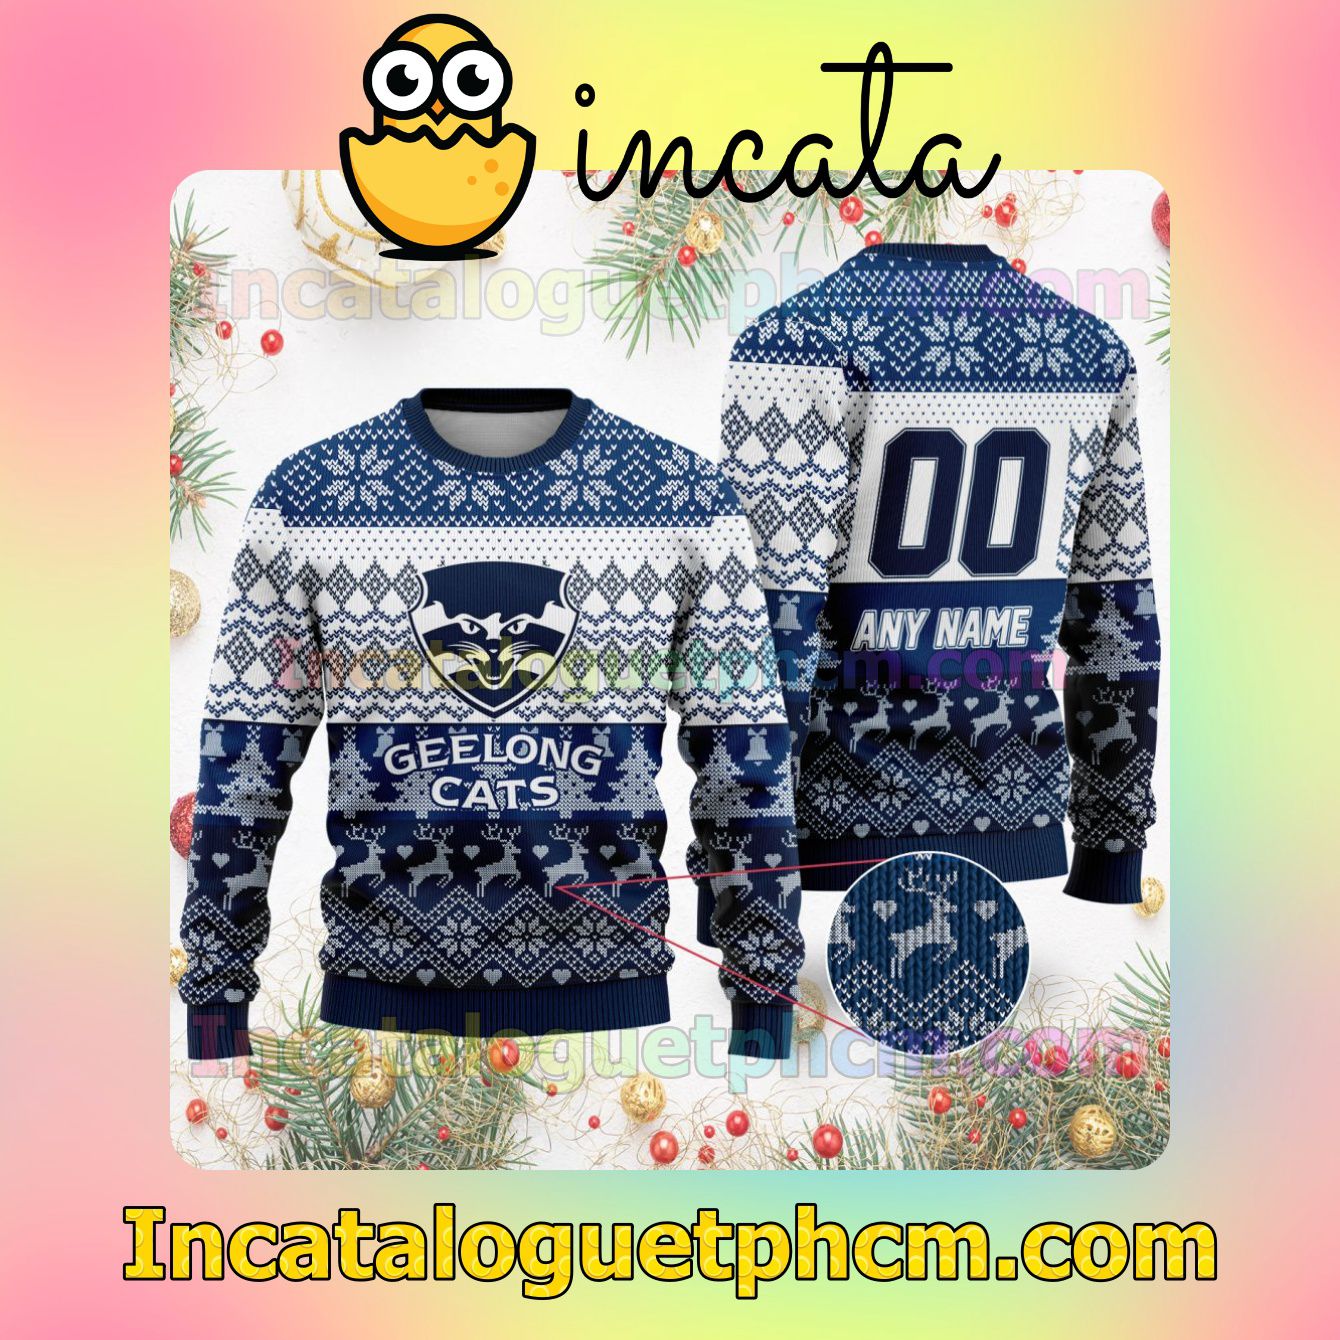 Very Good Quality AFL Geelong Cats Ugly Christmas Jumper Sweater